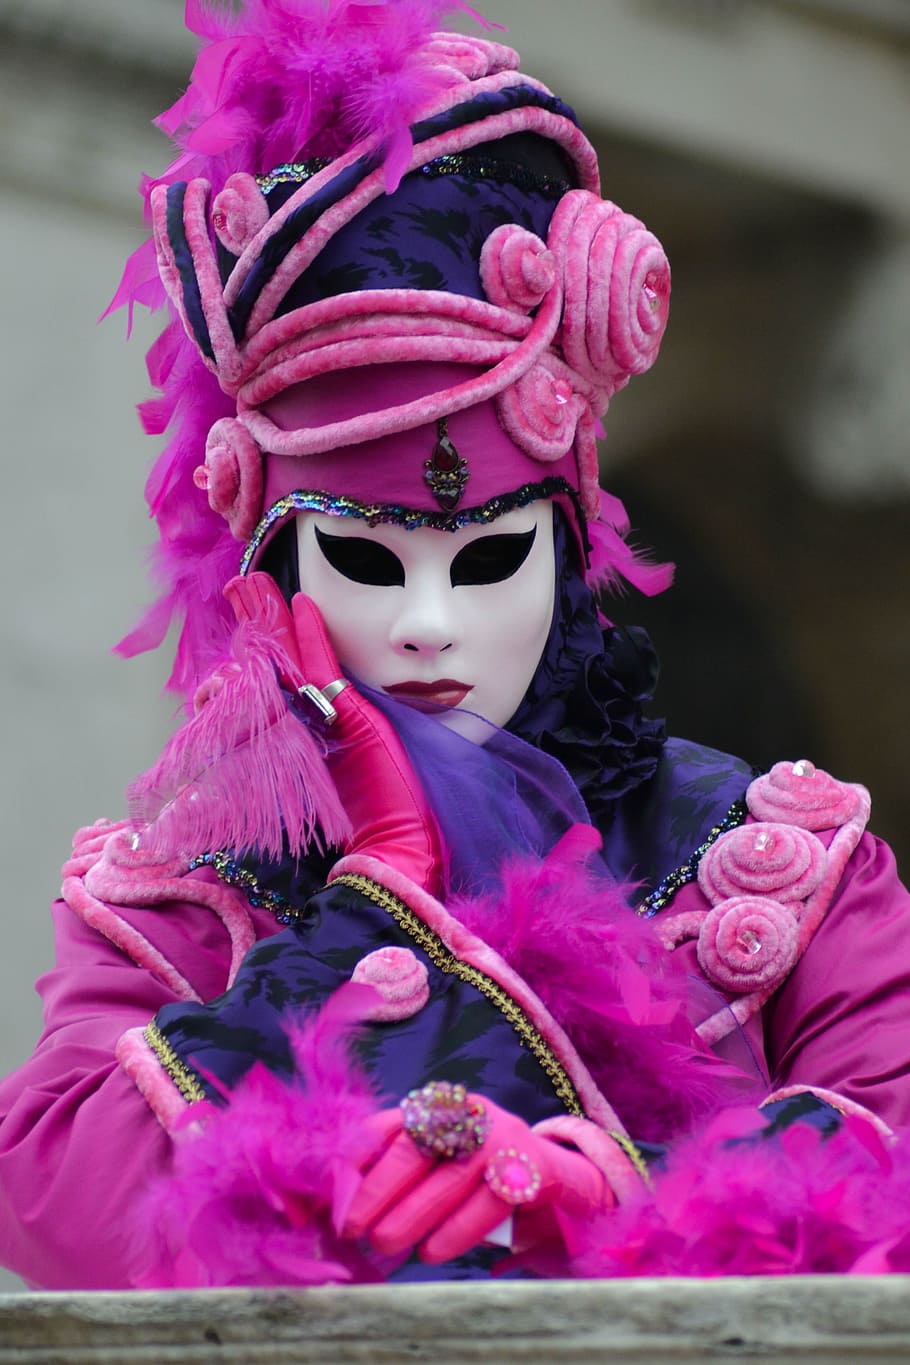 selective, focus photograph person, pink, purple, outfit, mask, costume, lovely, carnival, people